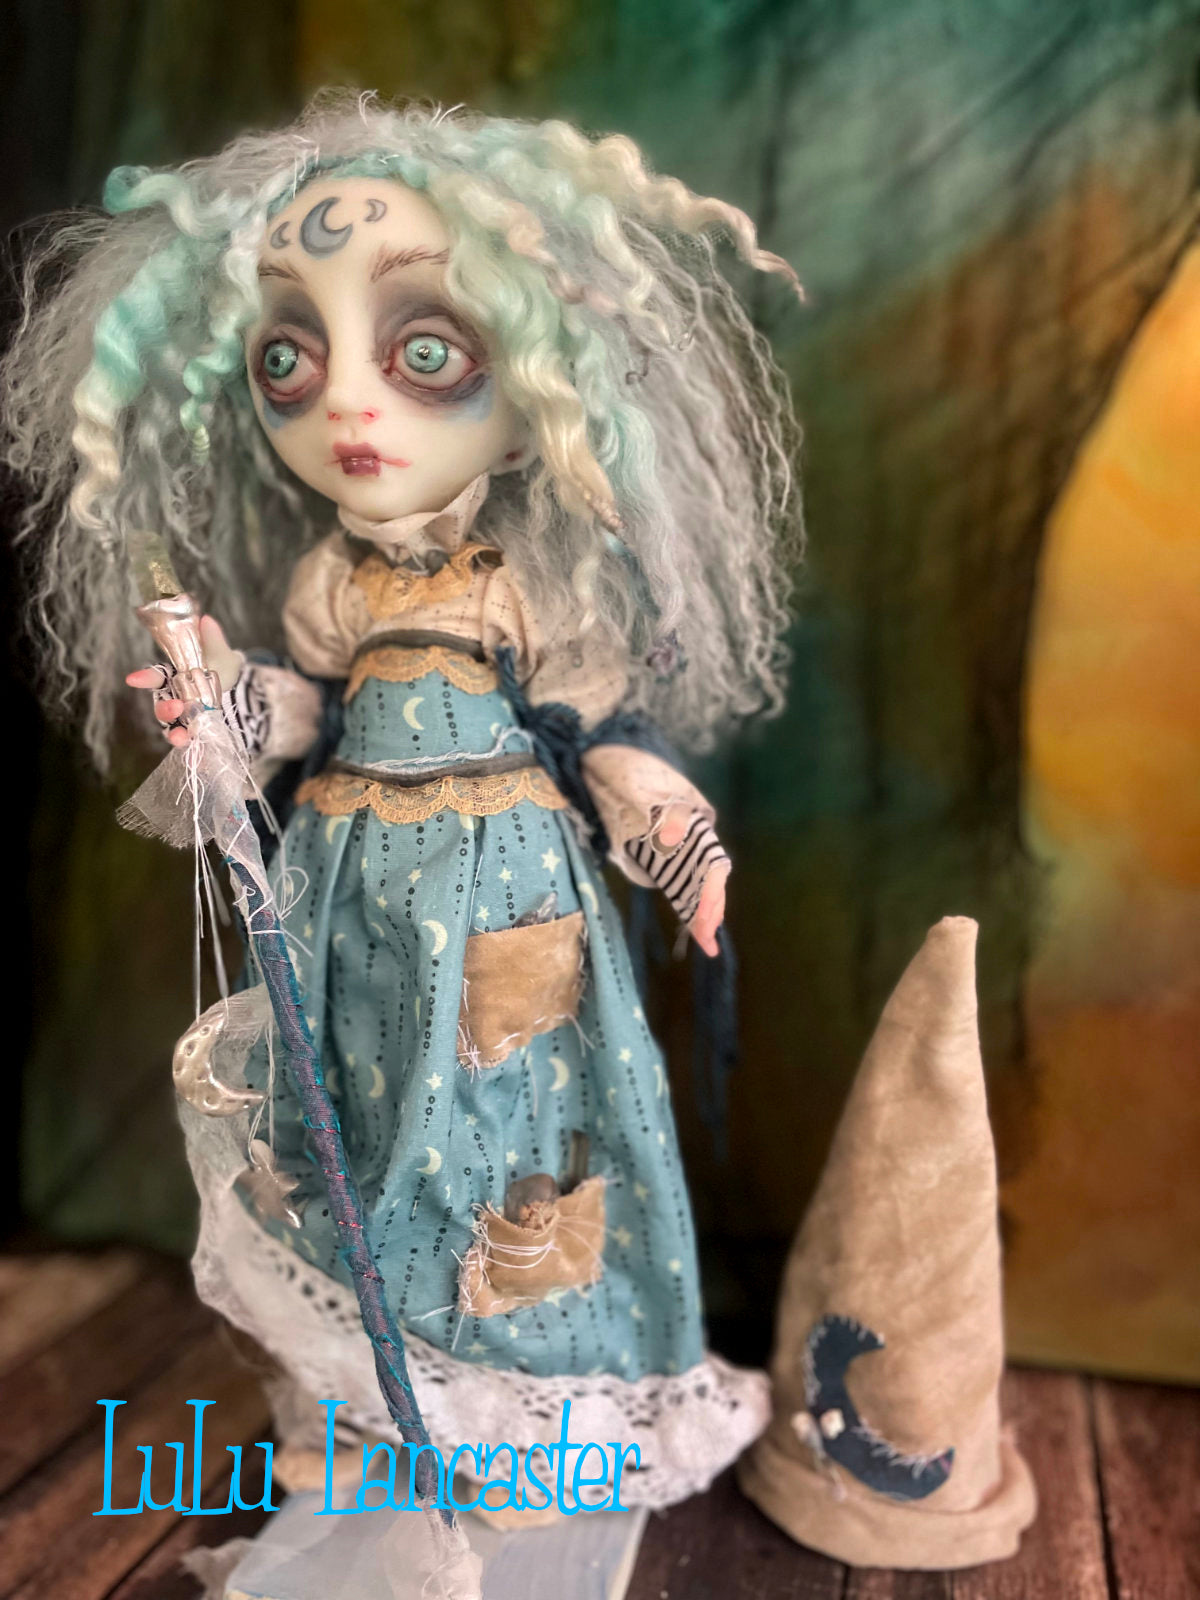 Cian the Witch of the waning crescent Moon Original LuLu Lancaster Art Doll